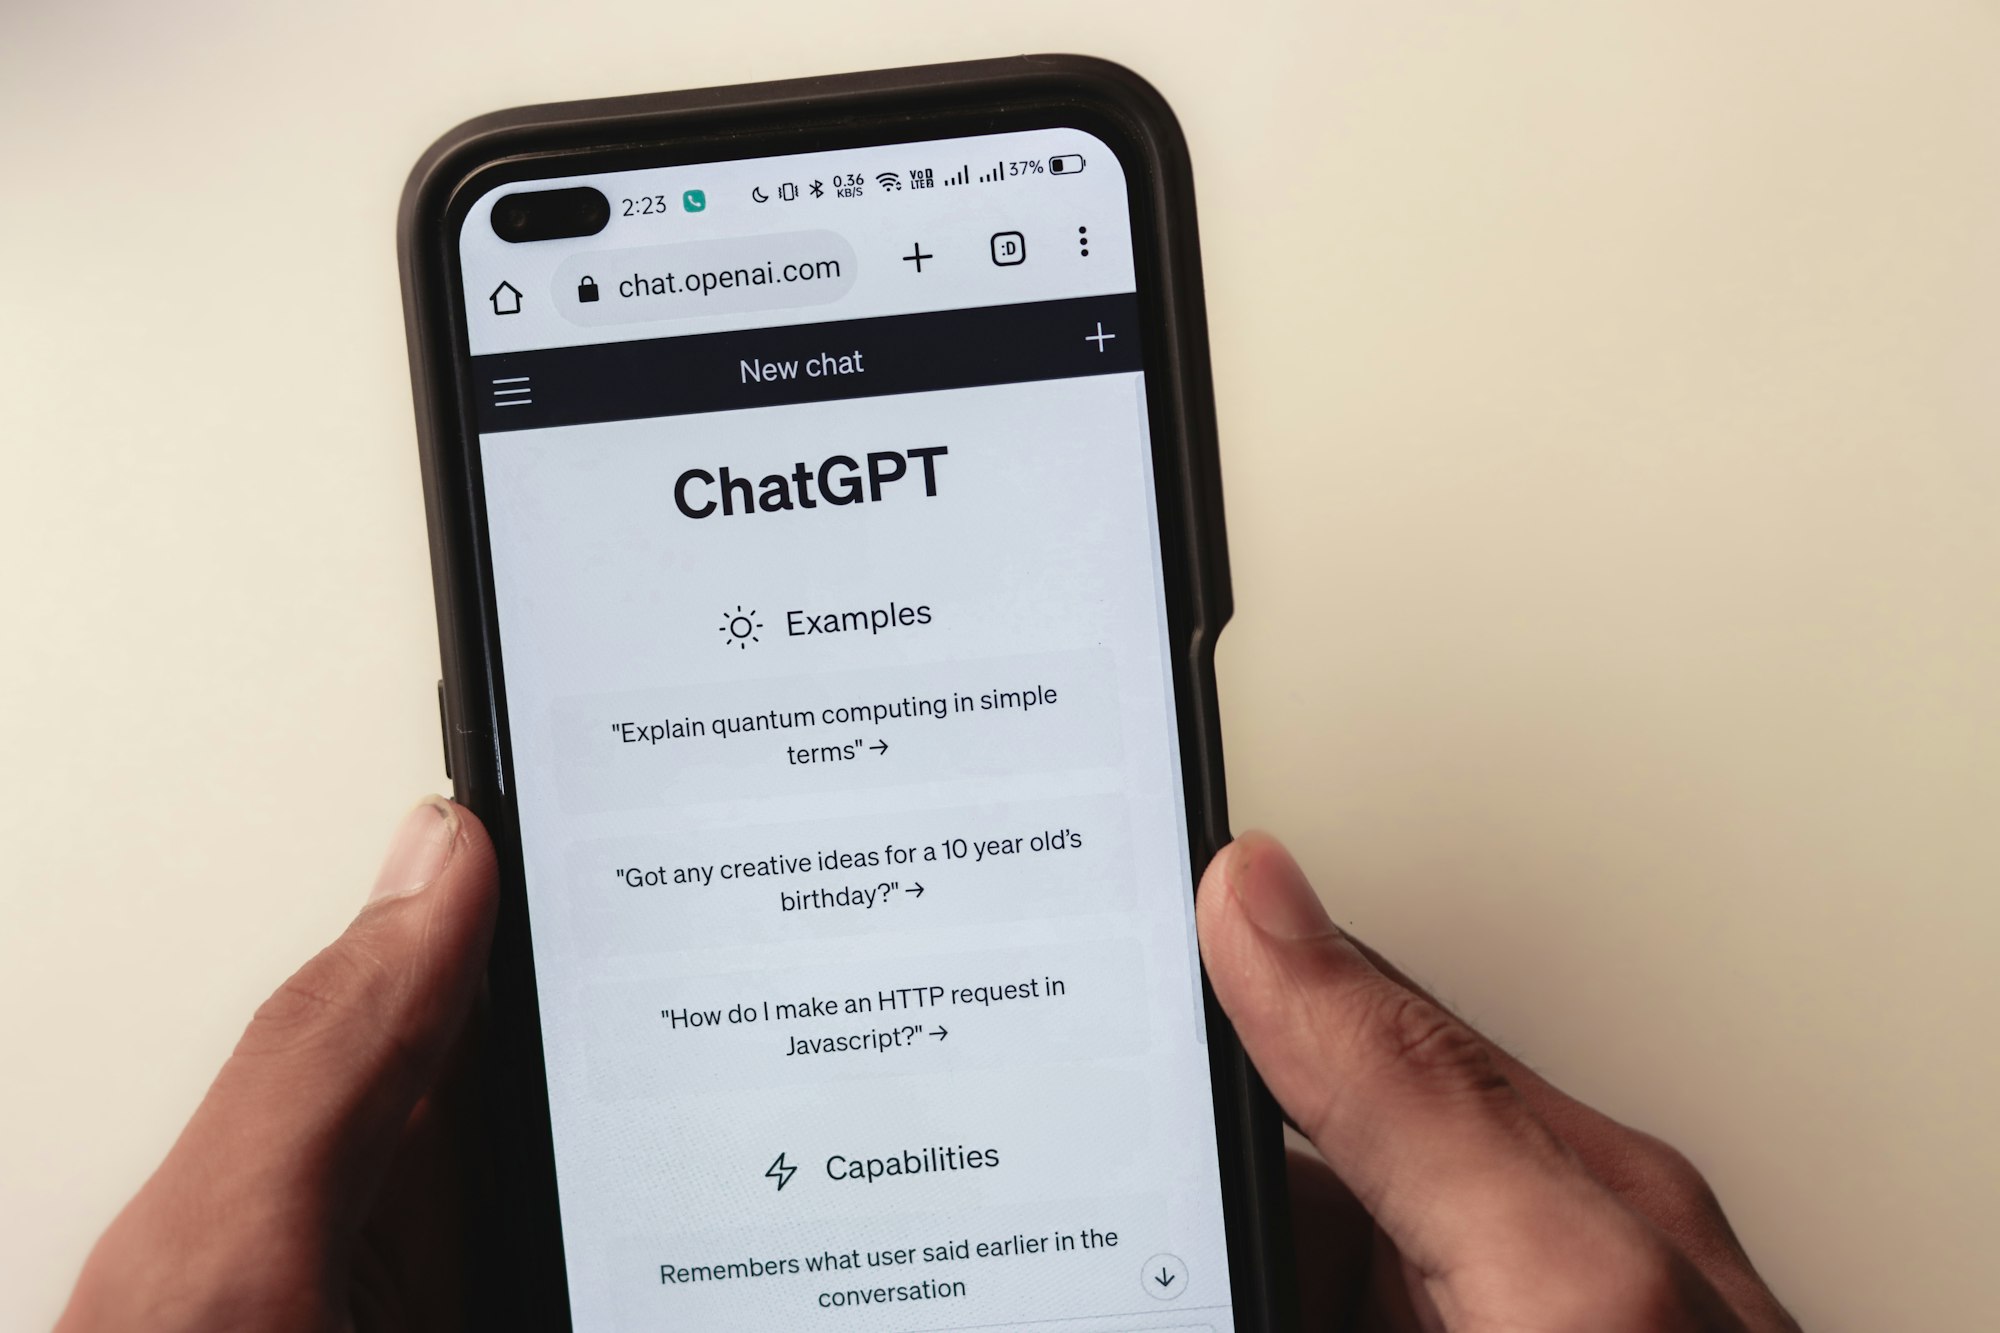 Webpage of ChatGPT, a prototype AI chatbot, is seen on the website of OpenAI, on a smartphone. Examples, capabilities, and limitations are shown in that picture.